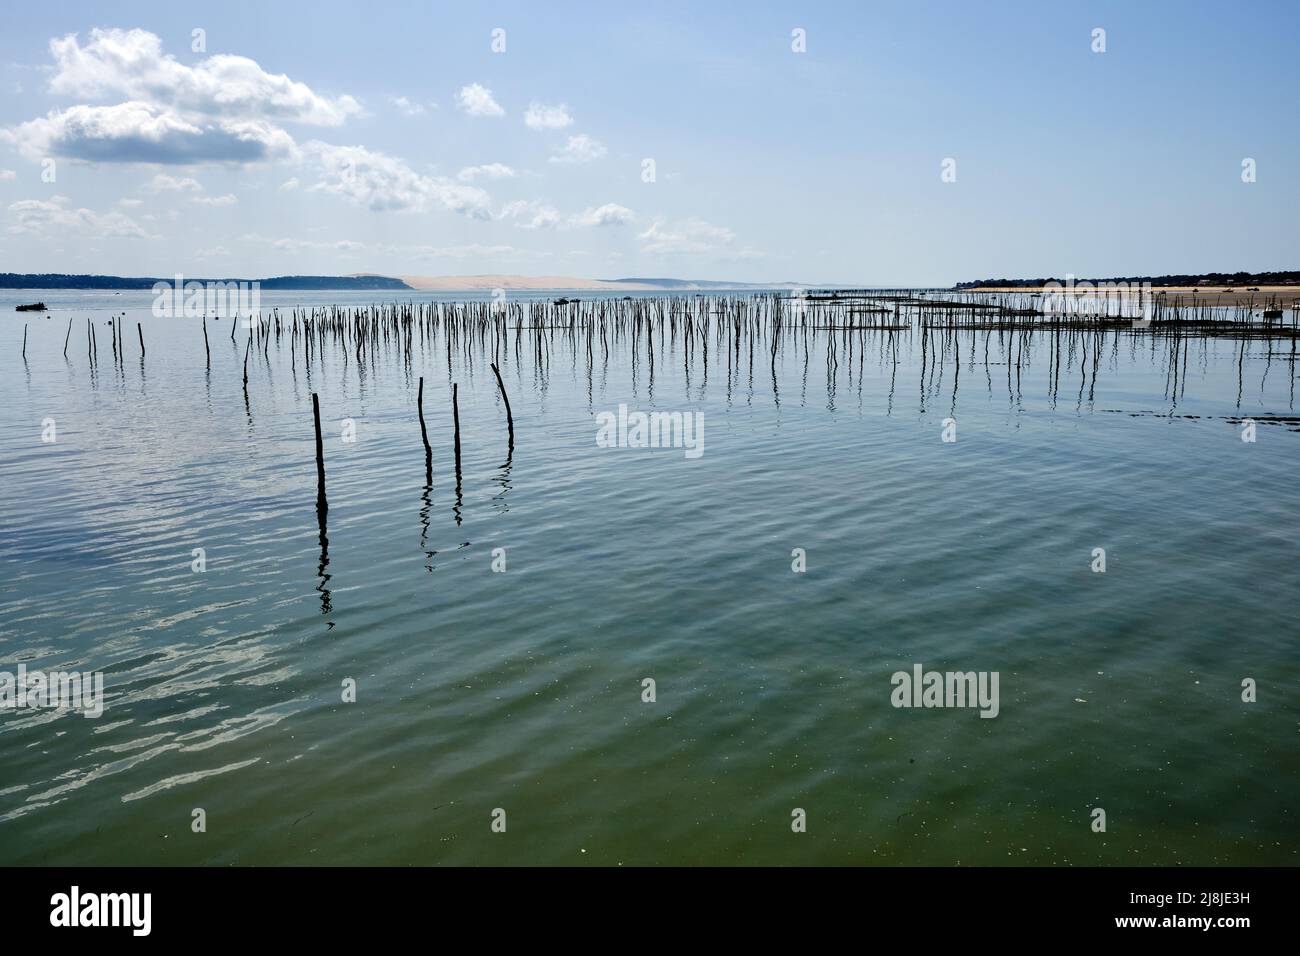 Oyster shell stick, column in the sea, for raising oysters. Cap-Ferret, Arcachon. Stock Photo